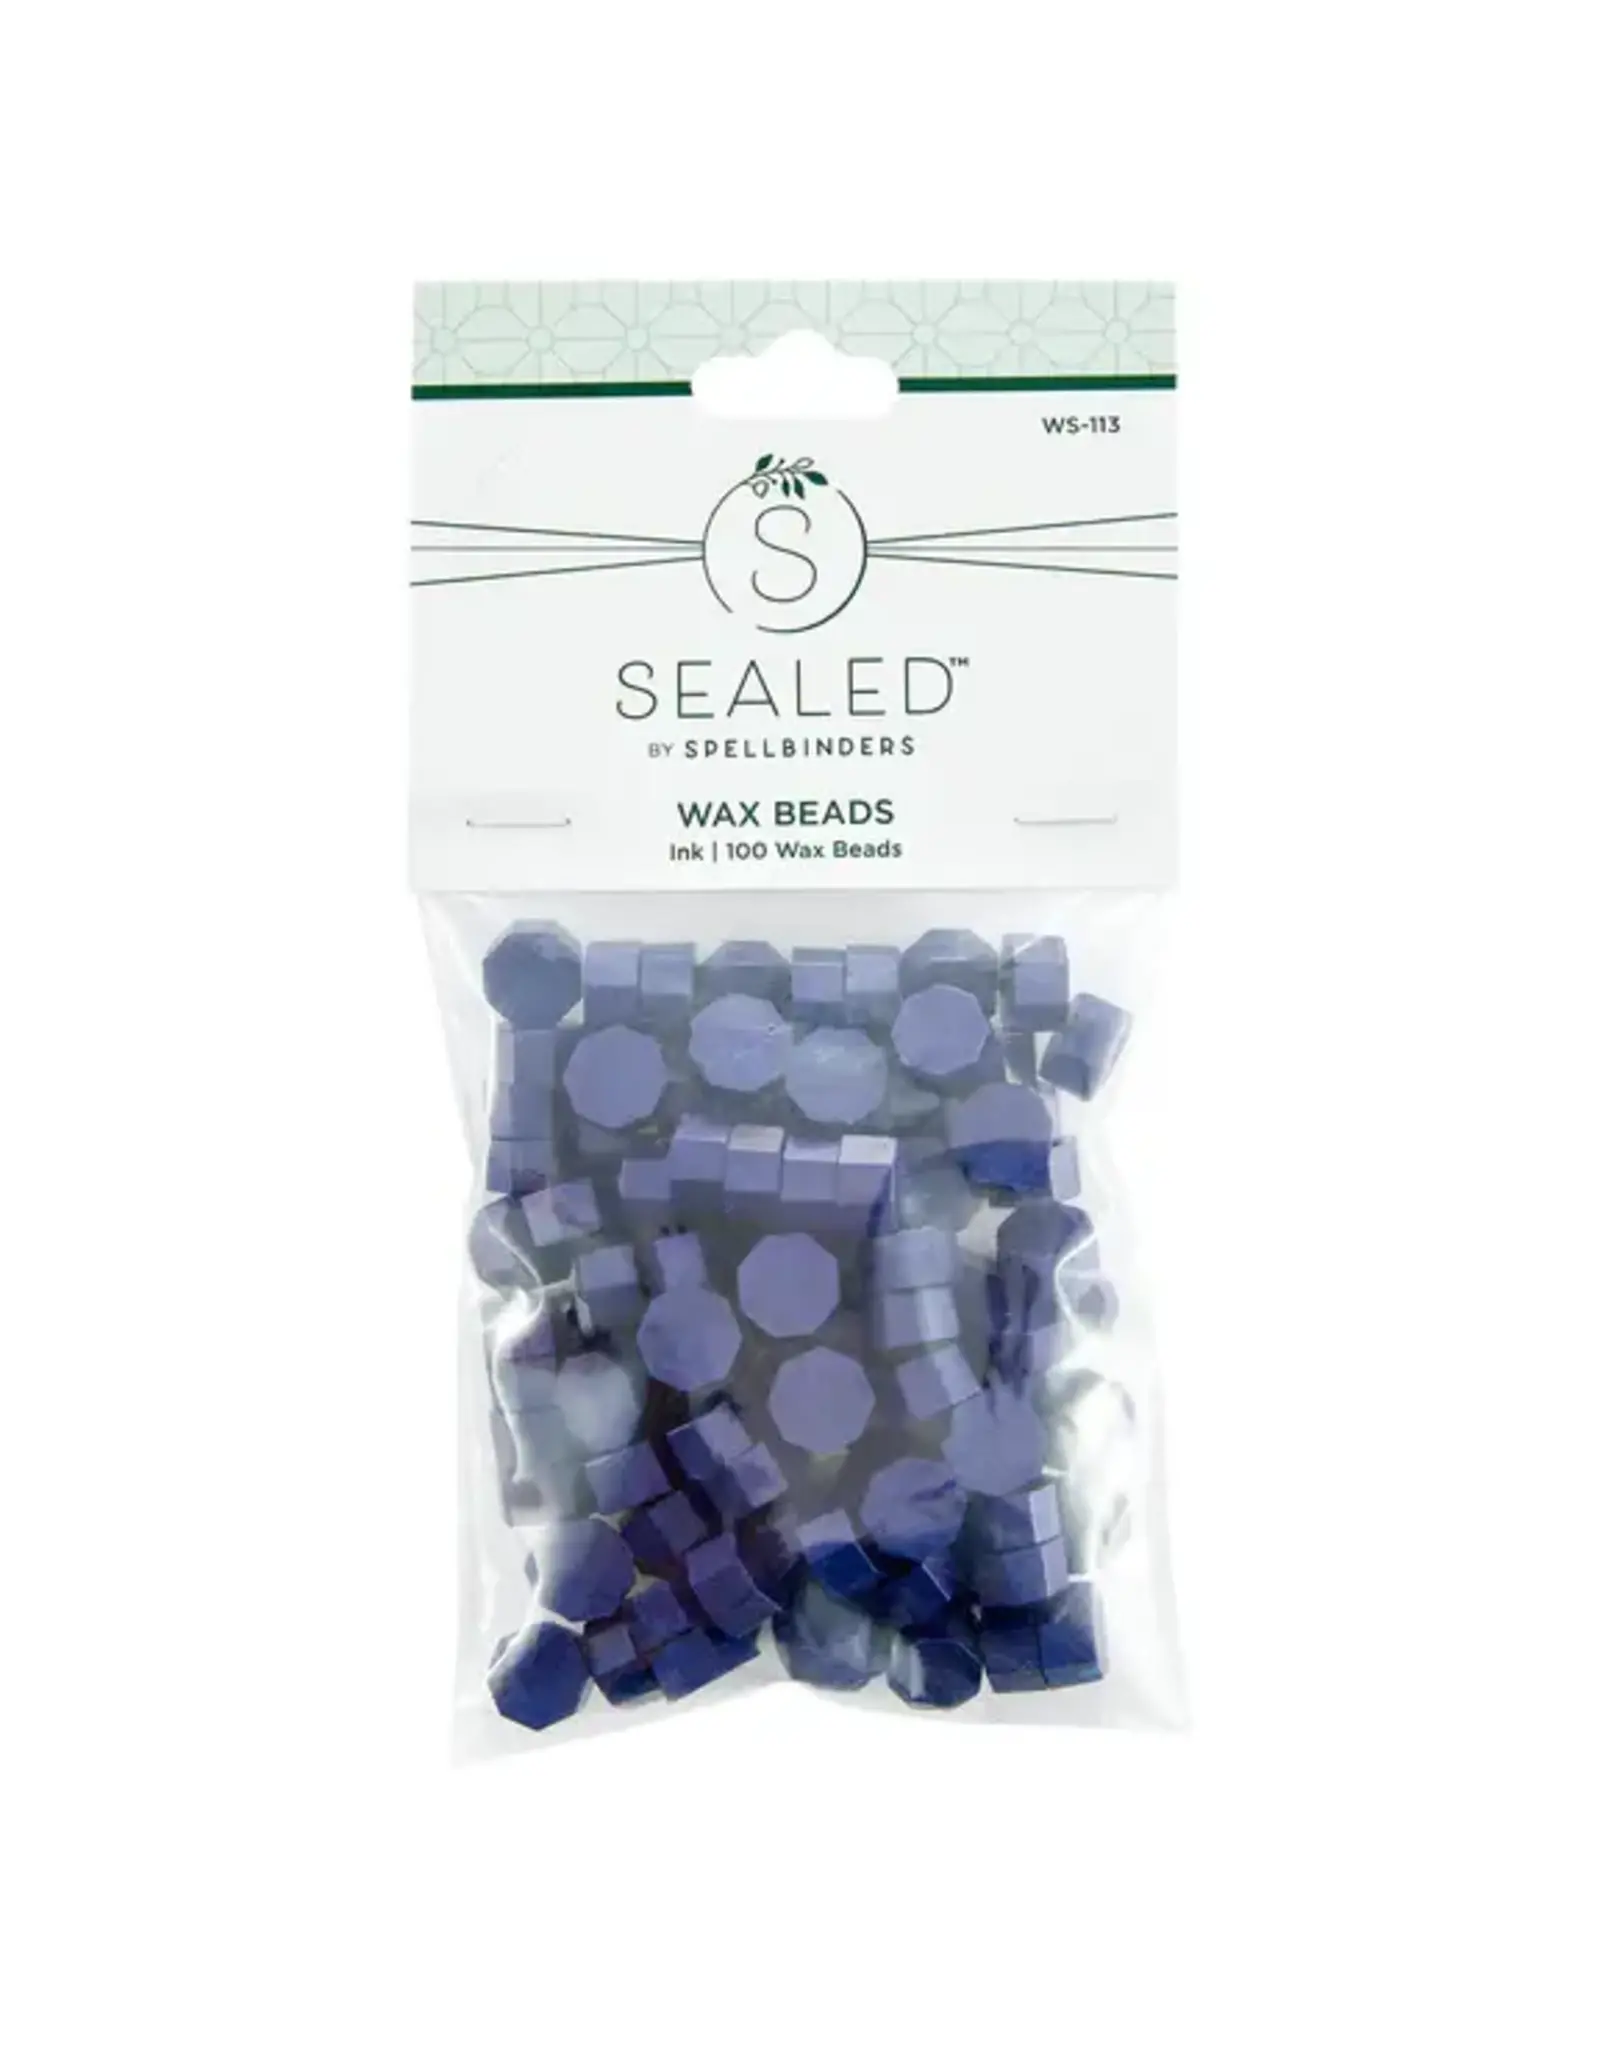 SPELLBINDERS SPELLBINDERS SEALED BY SPELLBINDERS COLLECTION INK WAX BEADS 100/PK